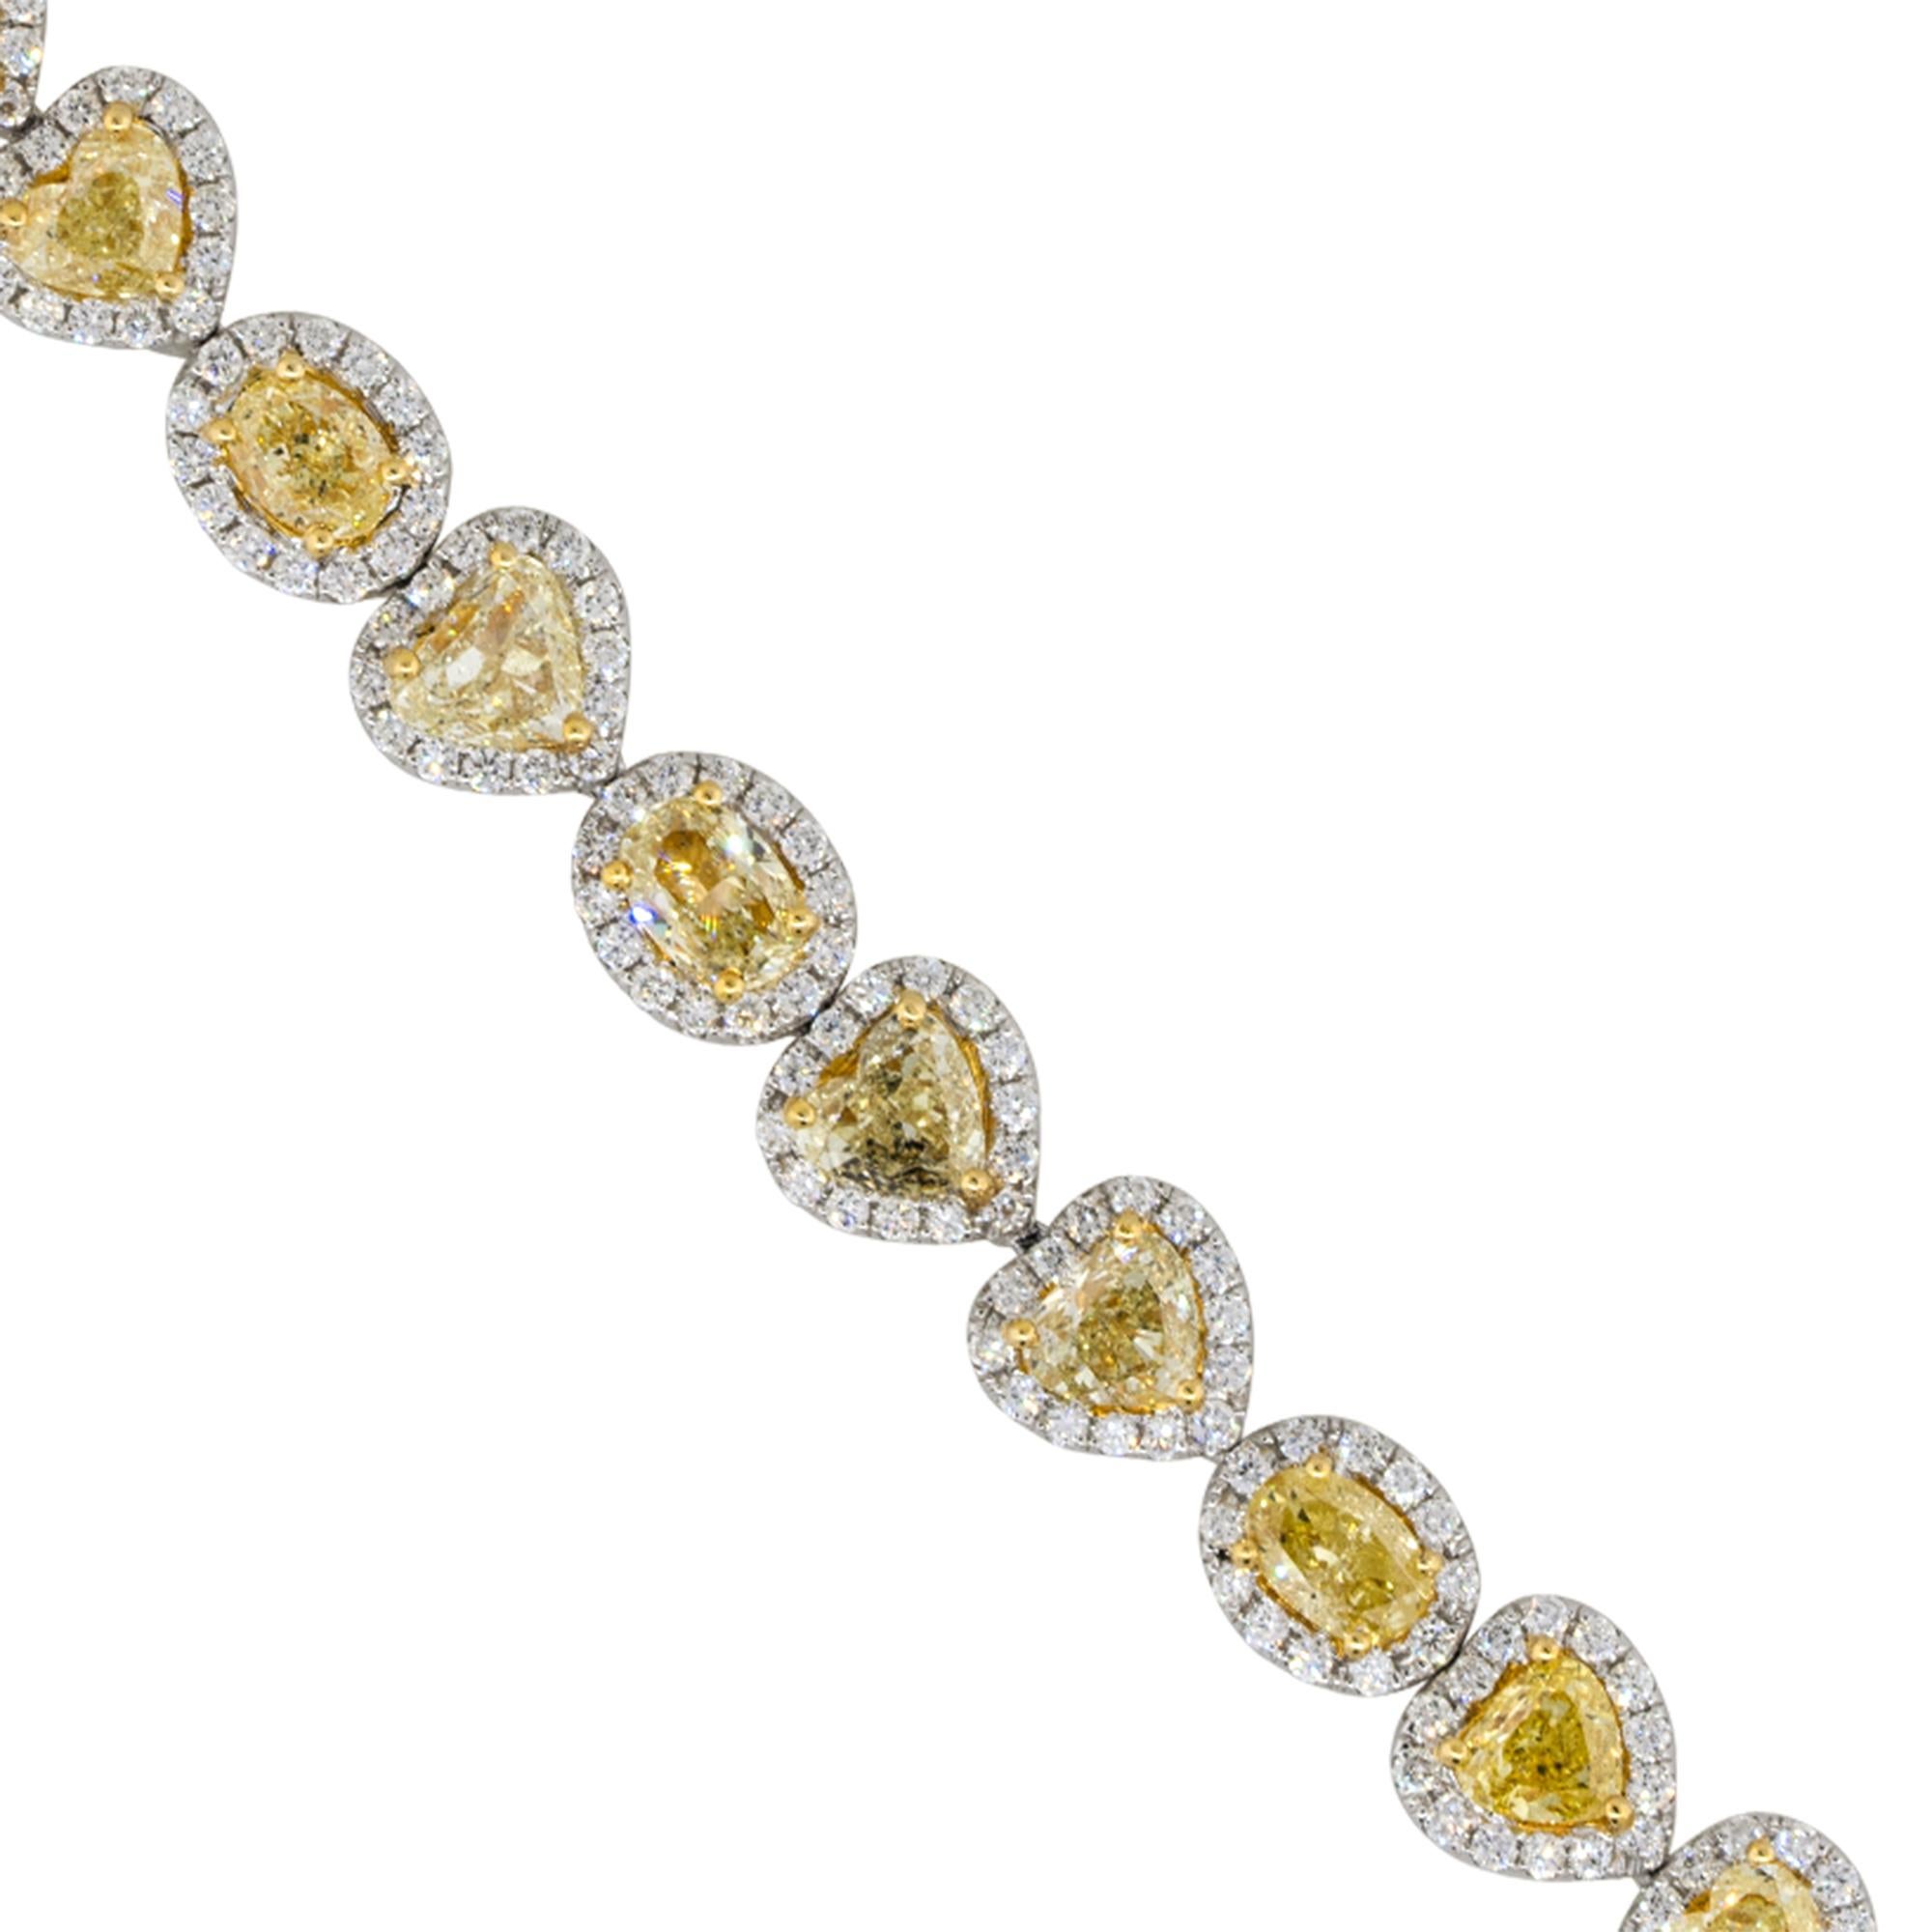 Material: 18k White Gold
Diamond Details: Approx. 3.14ctw of round cut Diamonds. Diamonds are G/H in color and VS in clarity
                             Approx. 12.83ctw of multi shaped Diamonds. Diamonds are Fancy Yellow in color and VS in